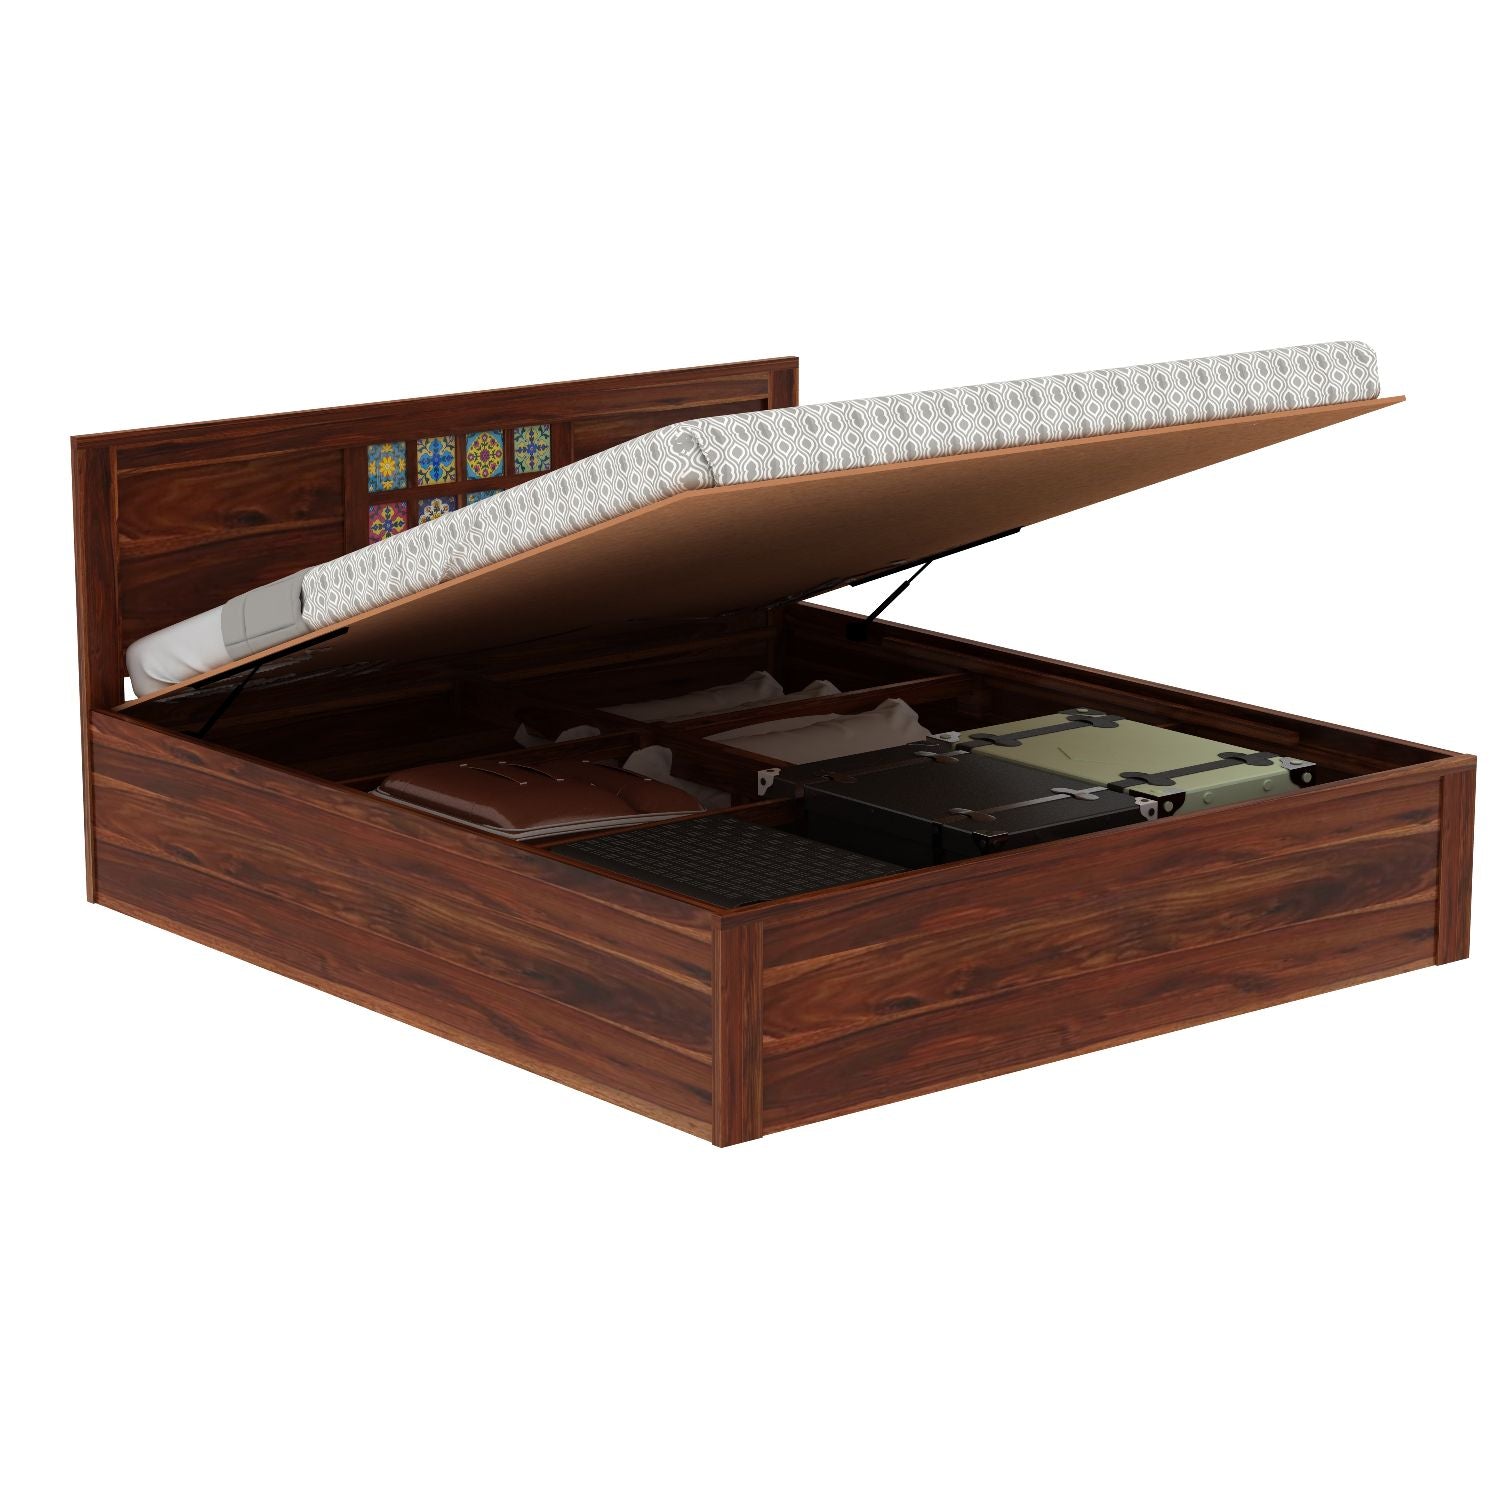 Dotwork Solid Sheesham Wood Hydraulic Bed With Box Storage (King Size, Natural Finish)